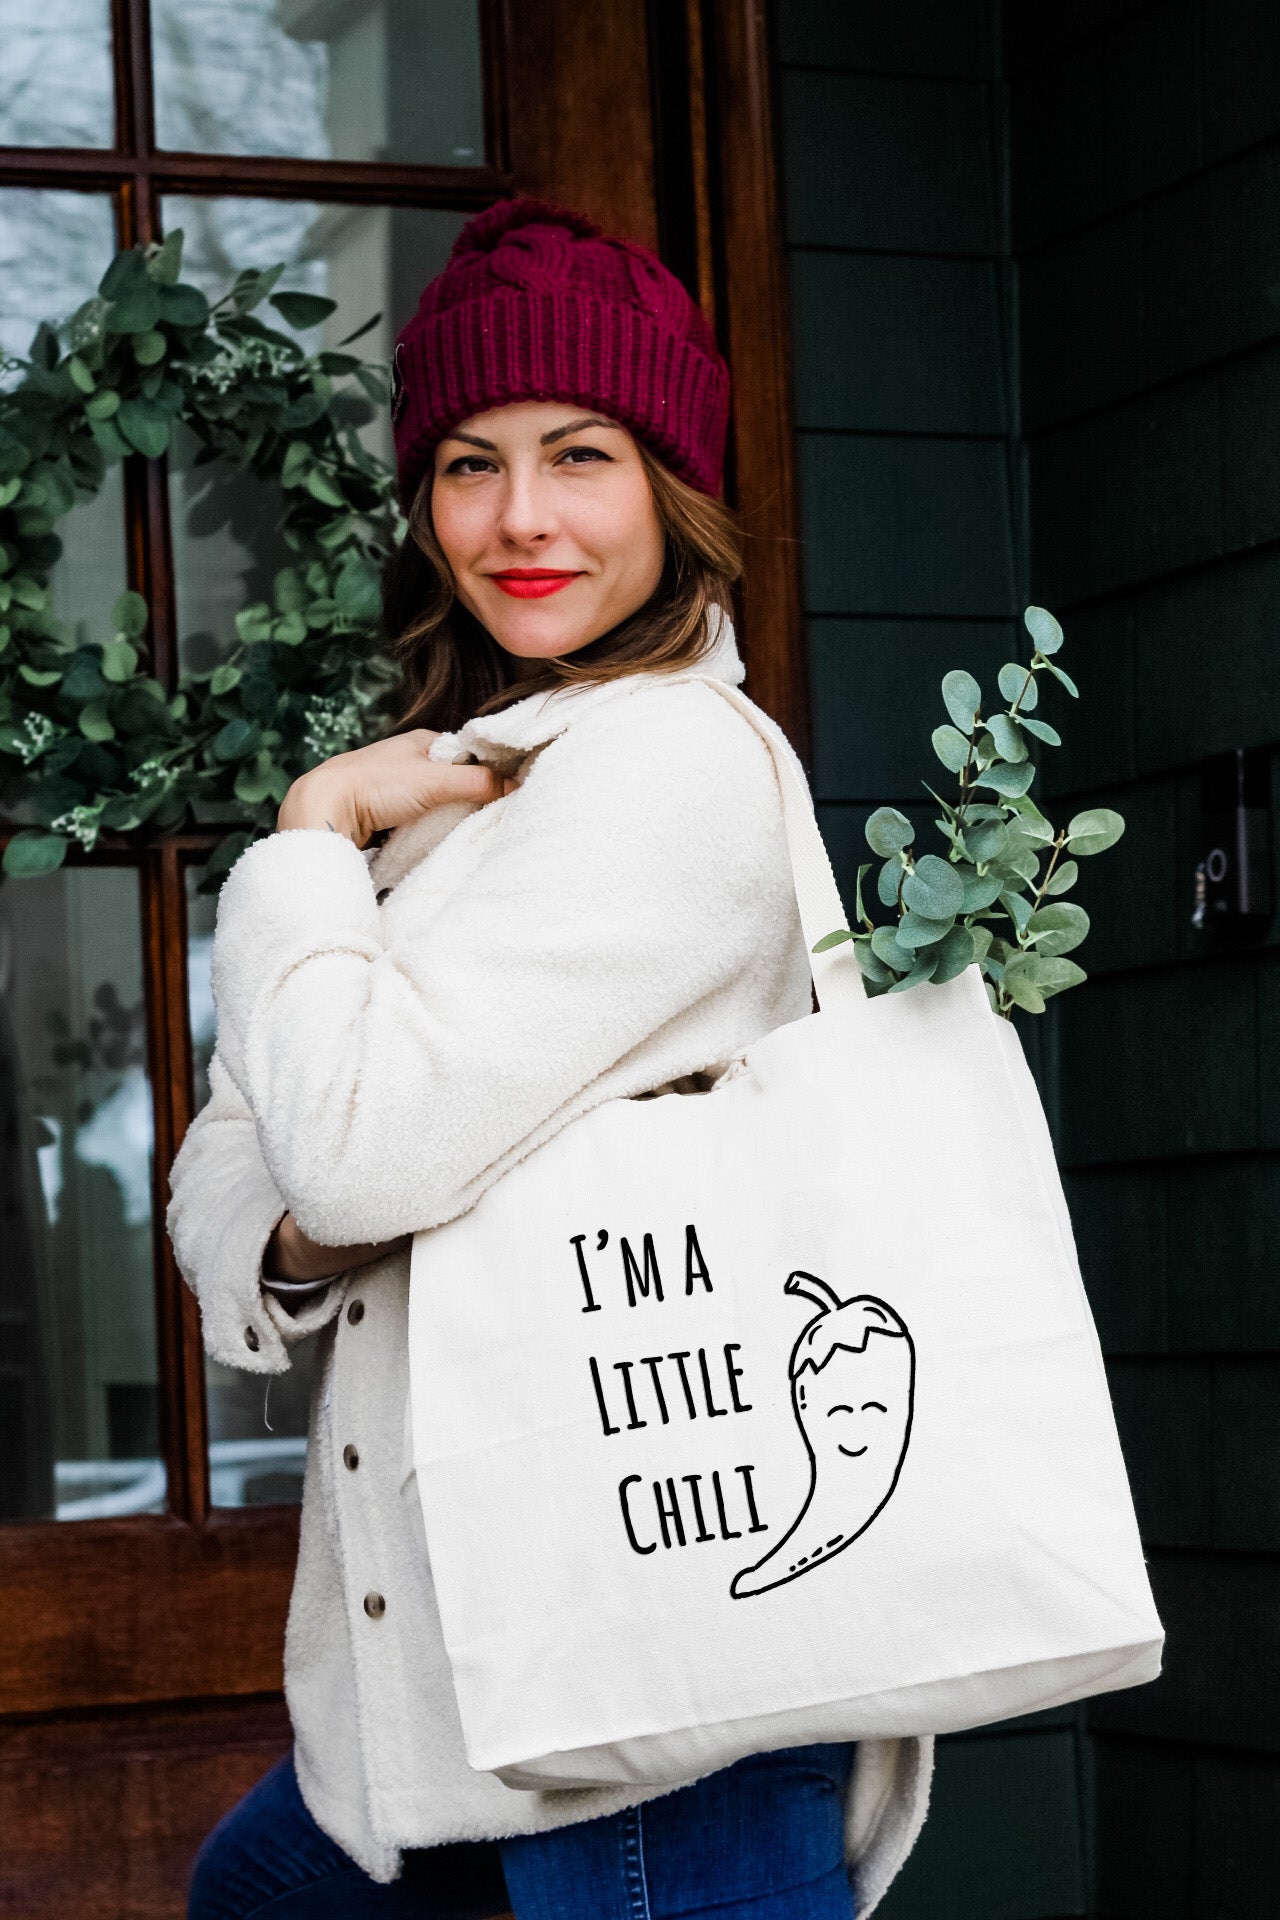 I'm A Little Chili - Tote Bag - MoonlightMakers